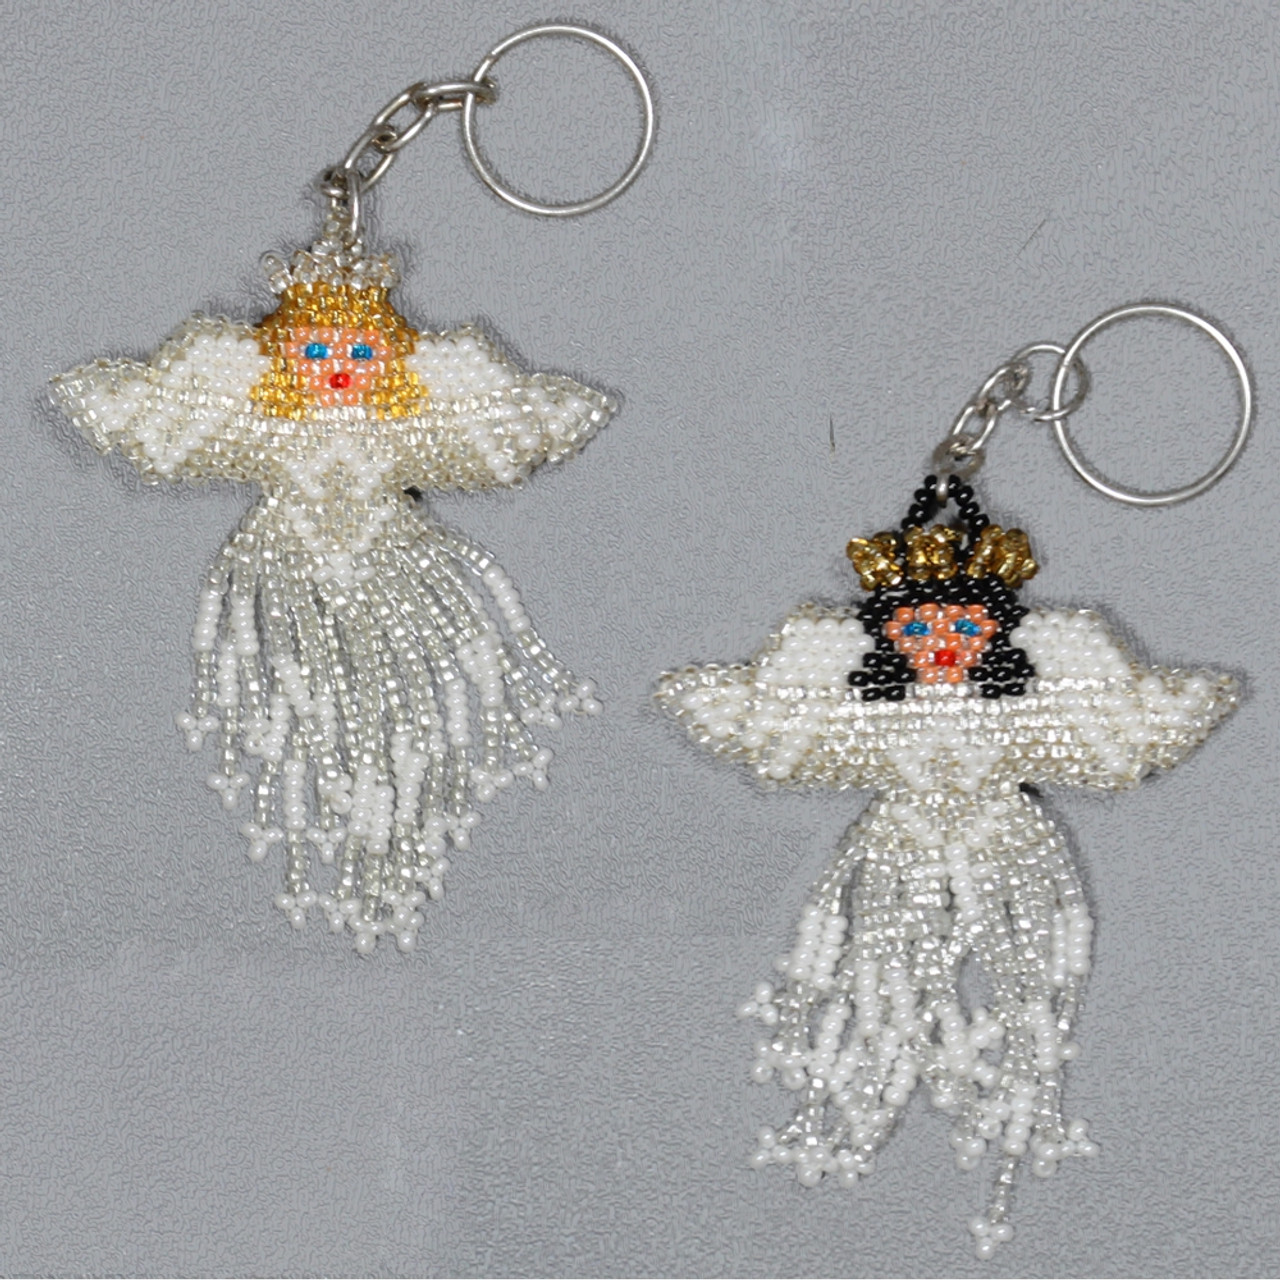 Torch Fired Enameled Angels, Angel Keychain, Angel Necklace, Angel